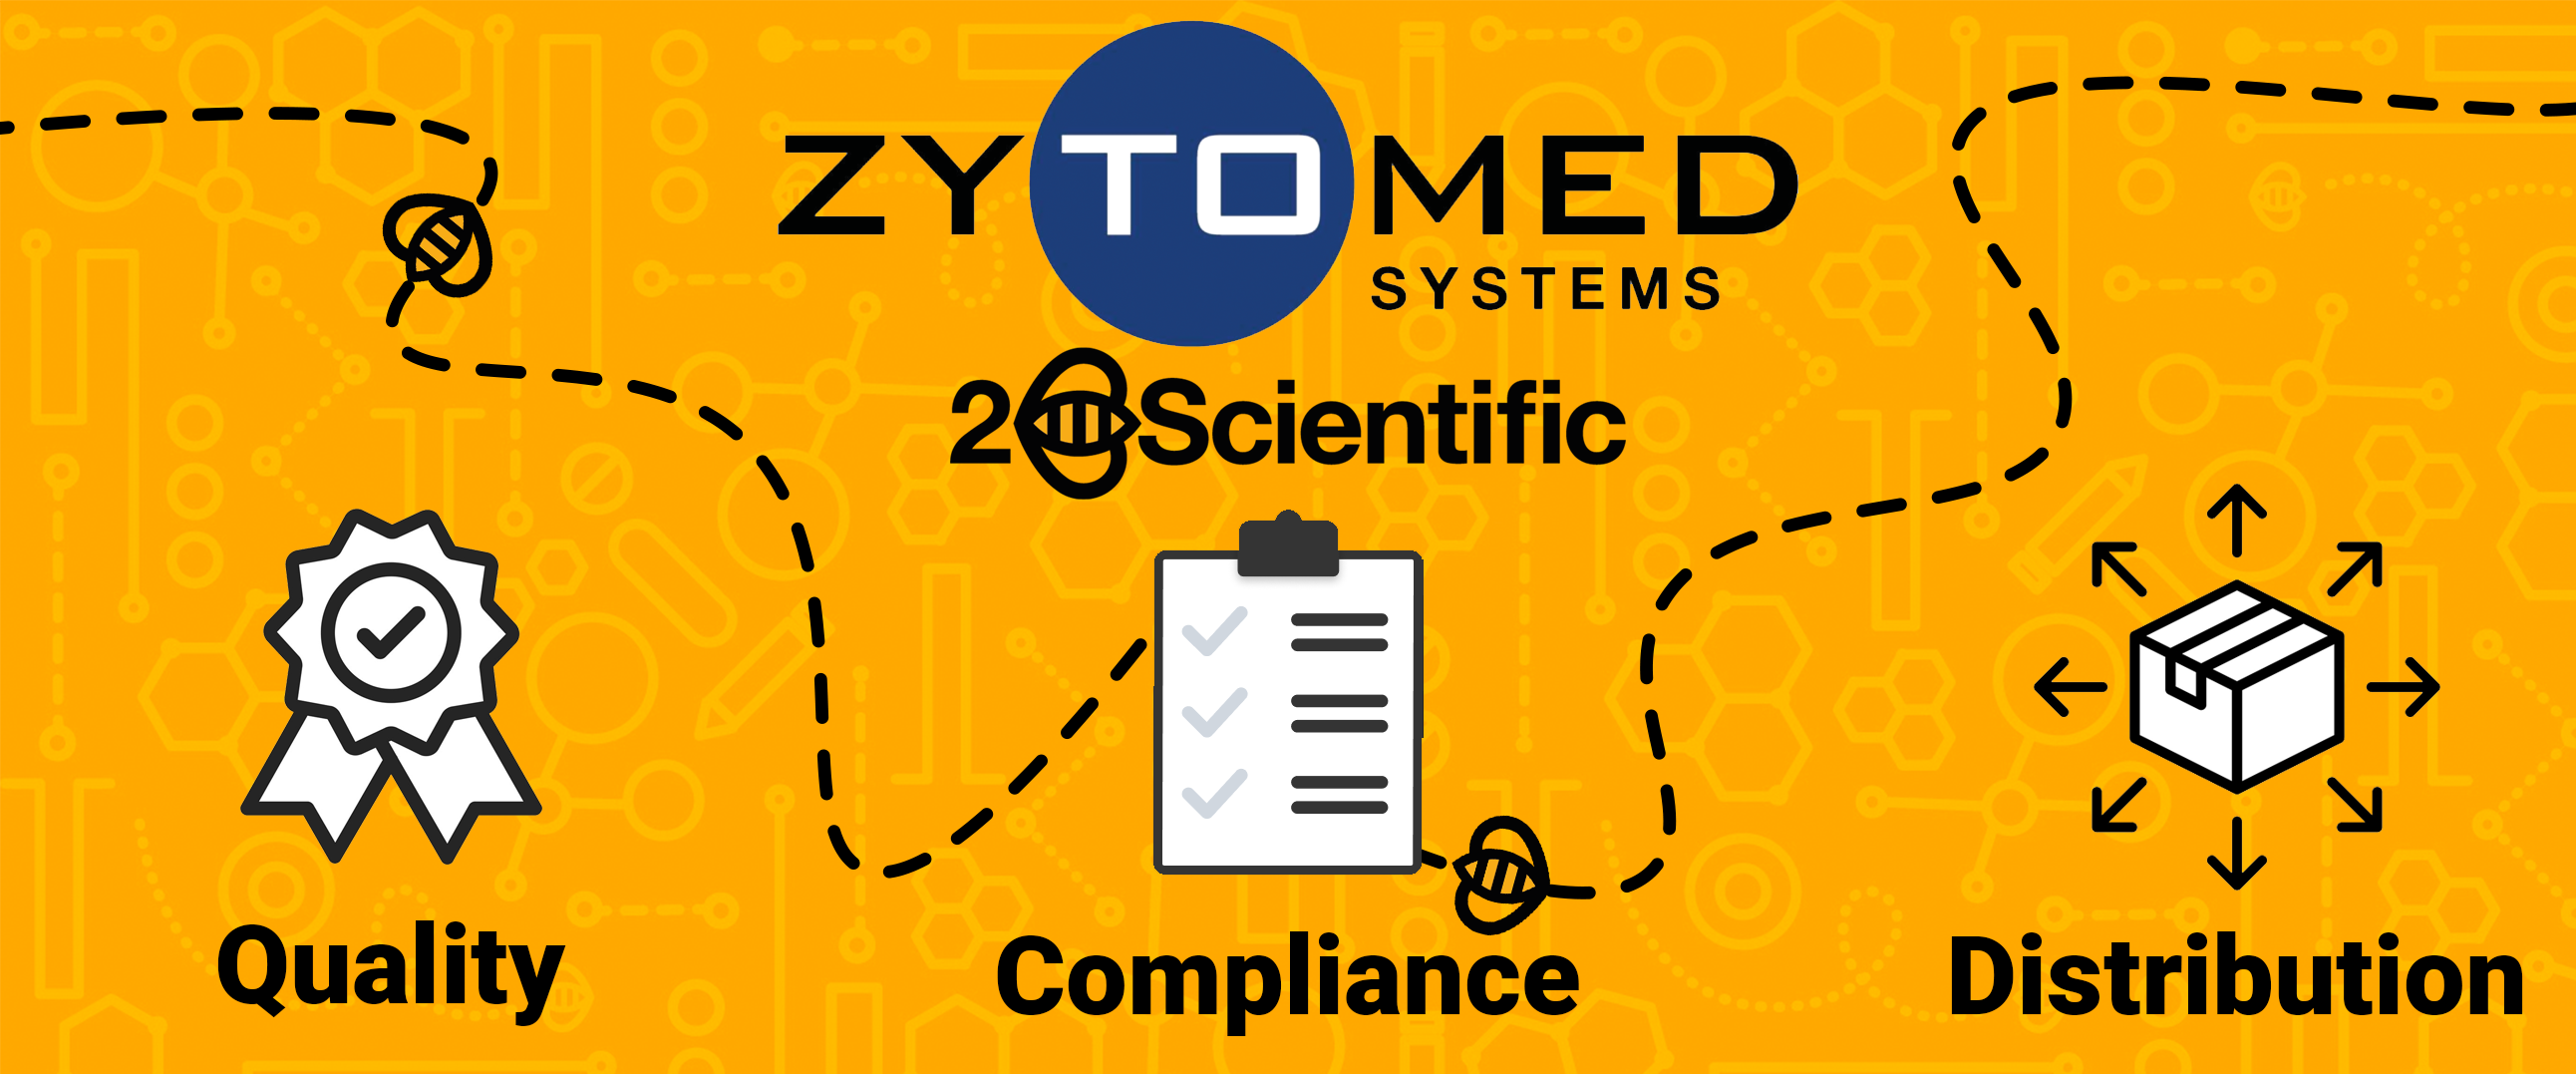 Zytomed Overview